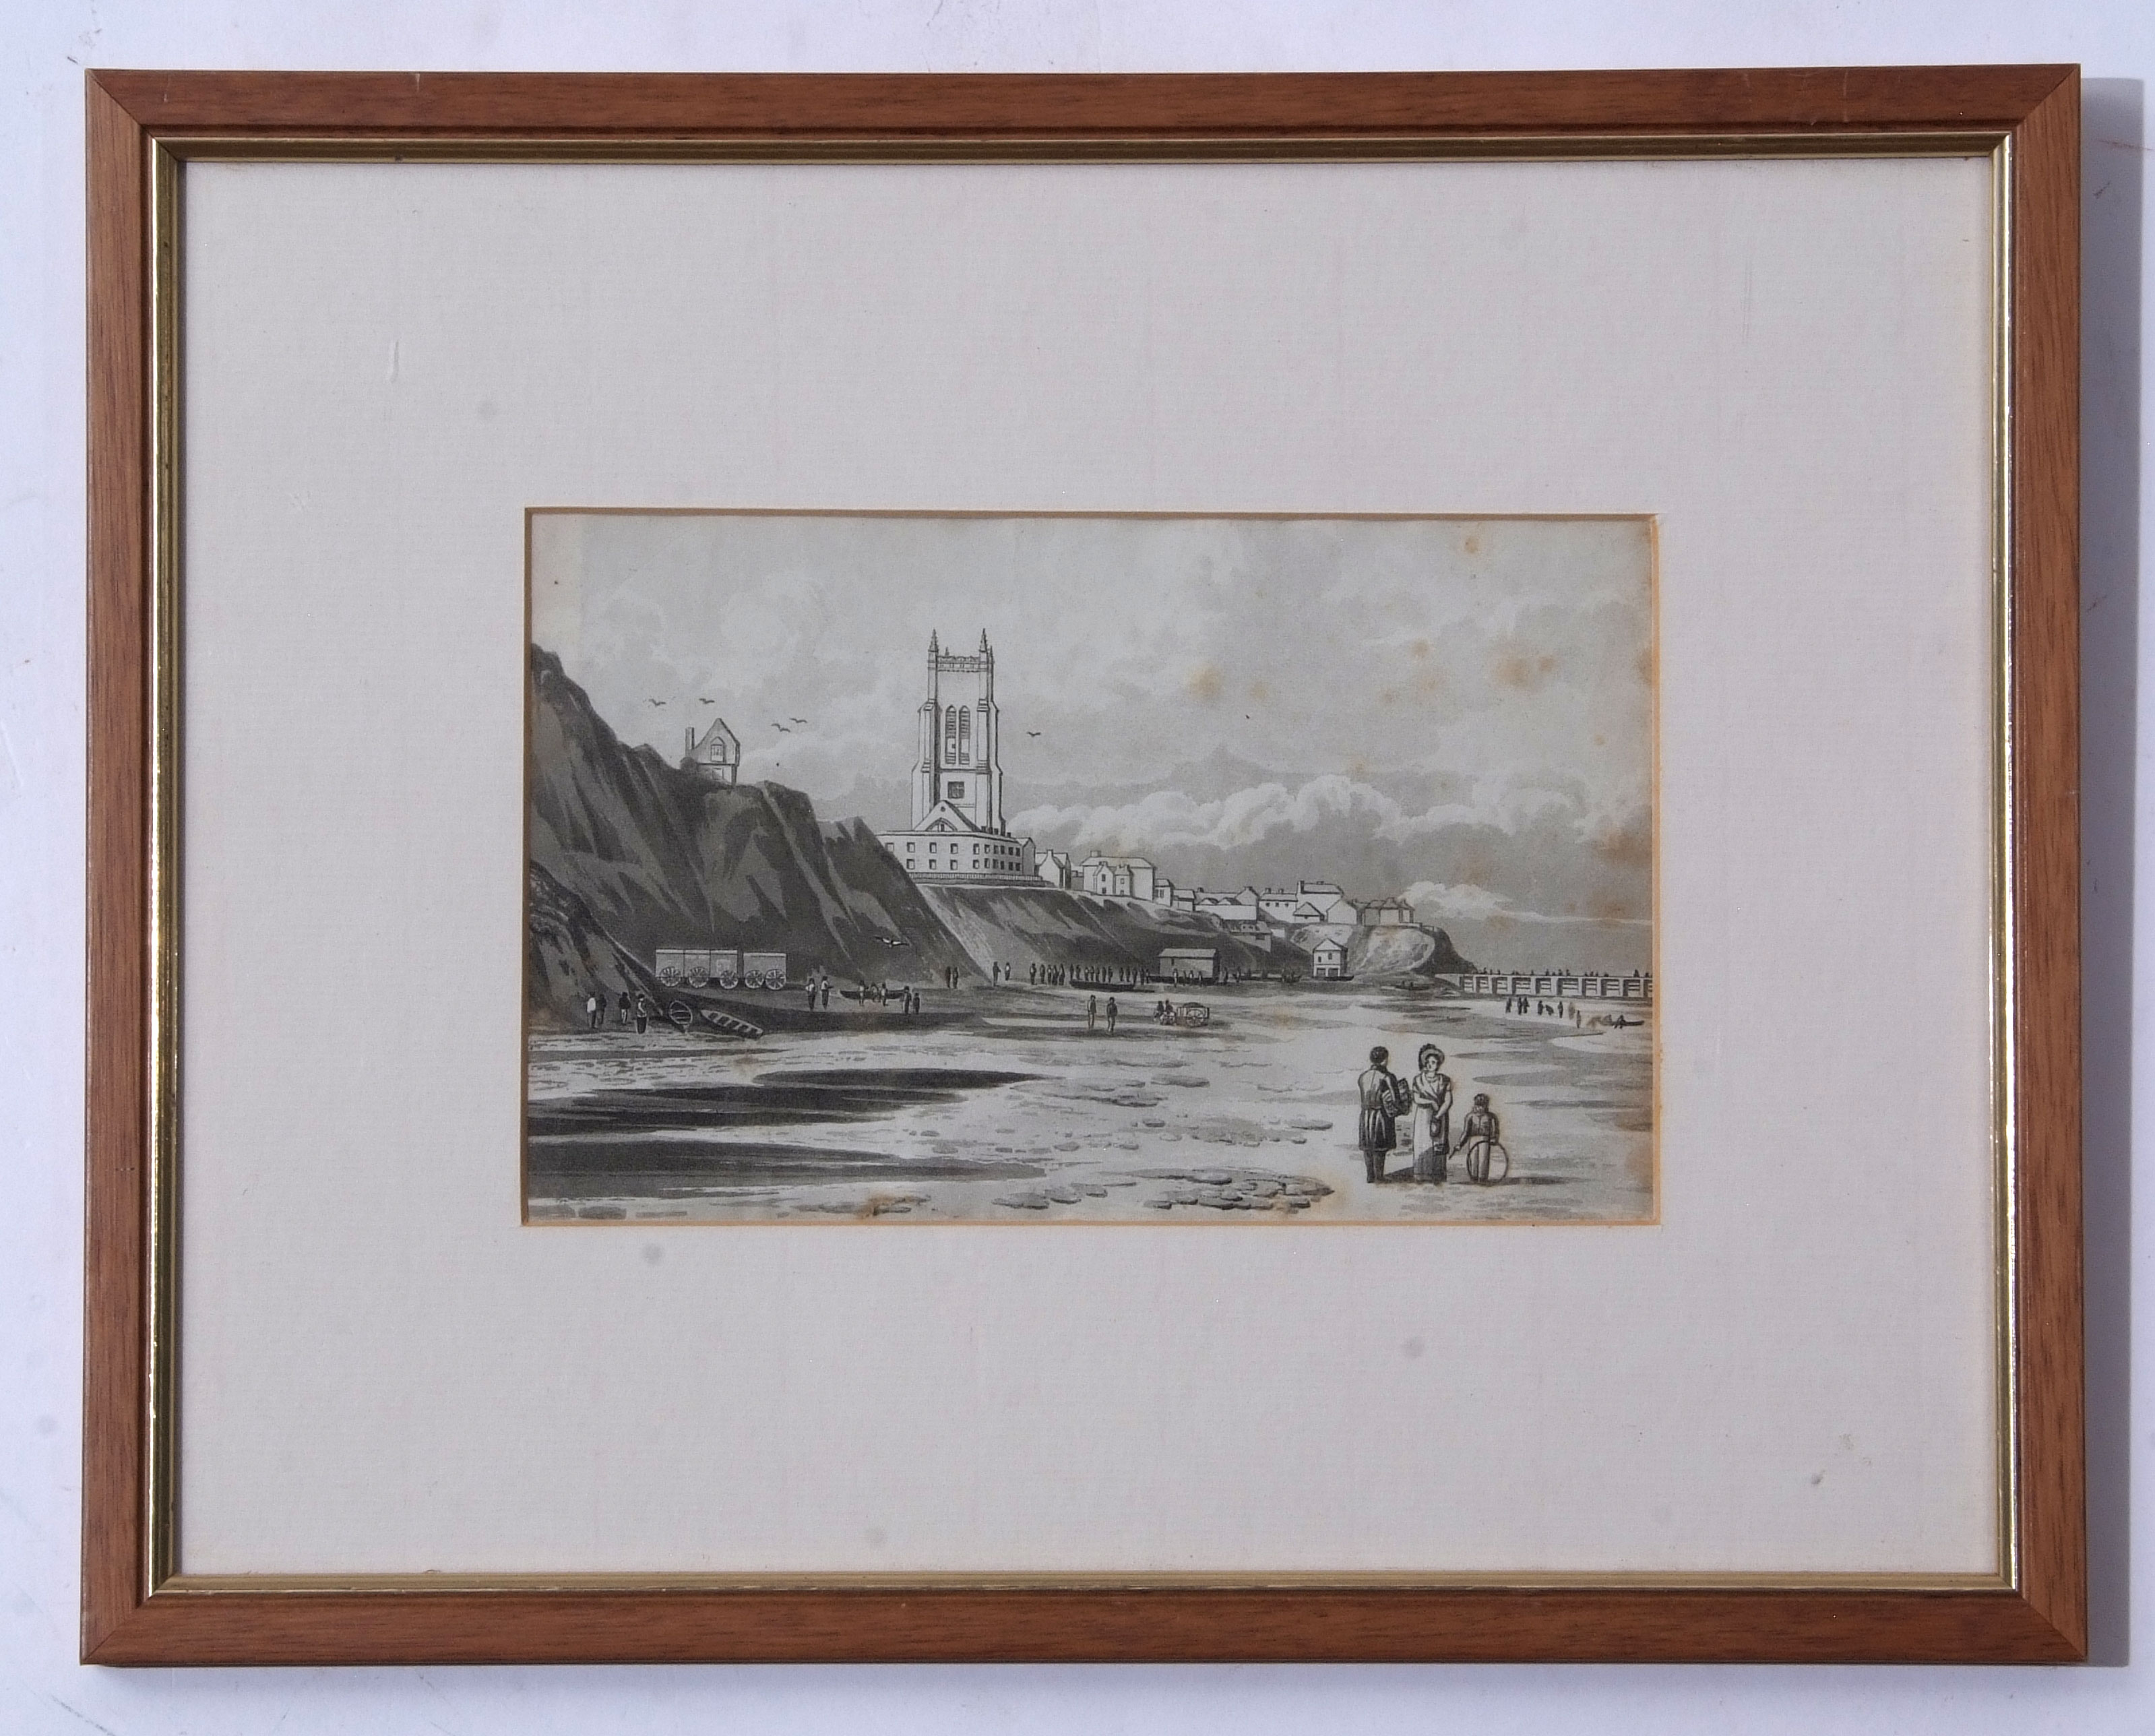 English School (19th century), "Cromer, 1823", black and white lithograph, 12 x 19cm, together - Image 3 of 4